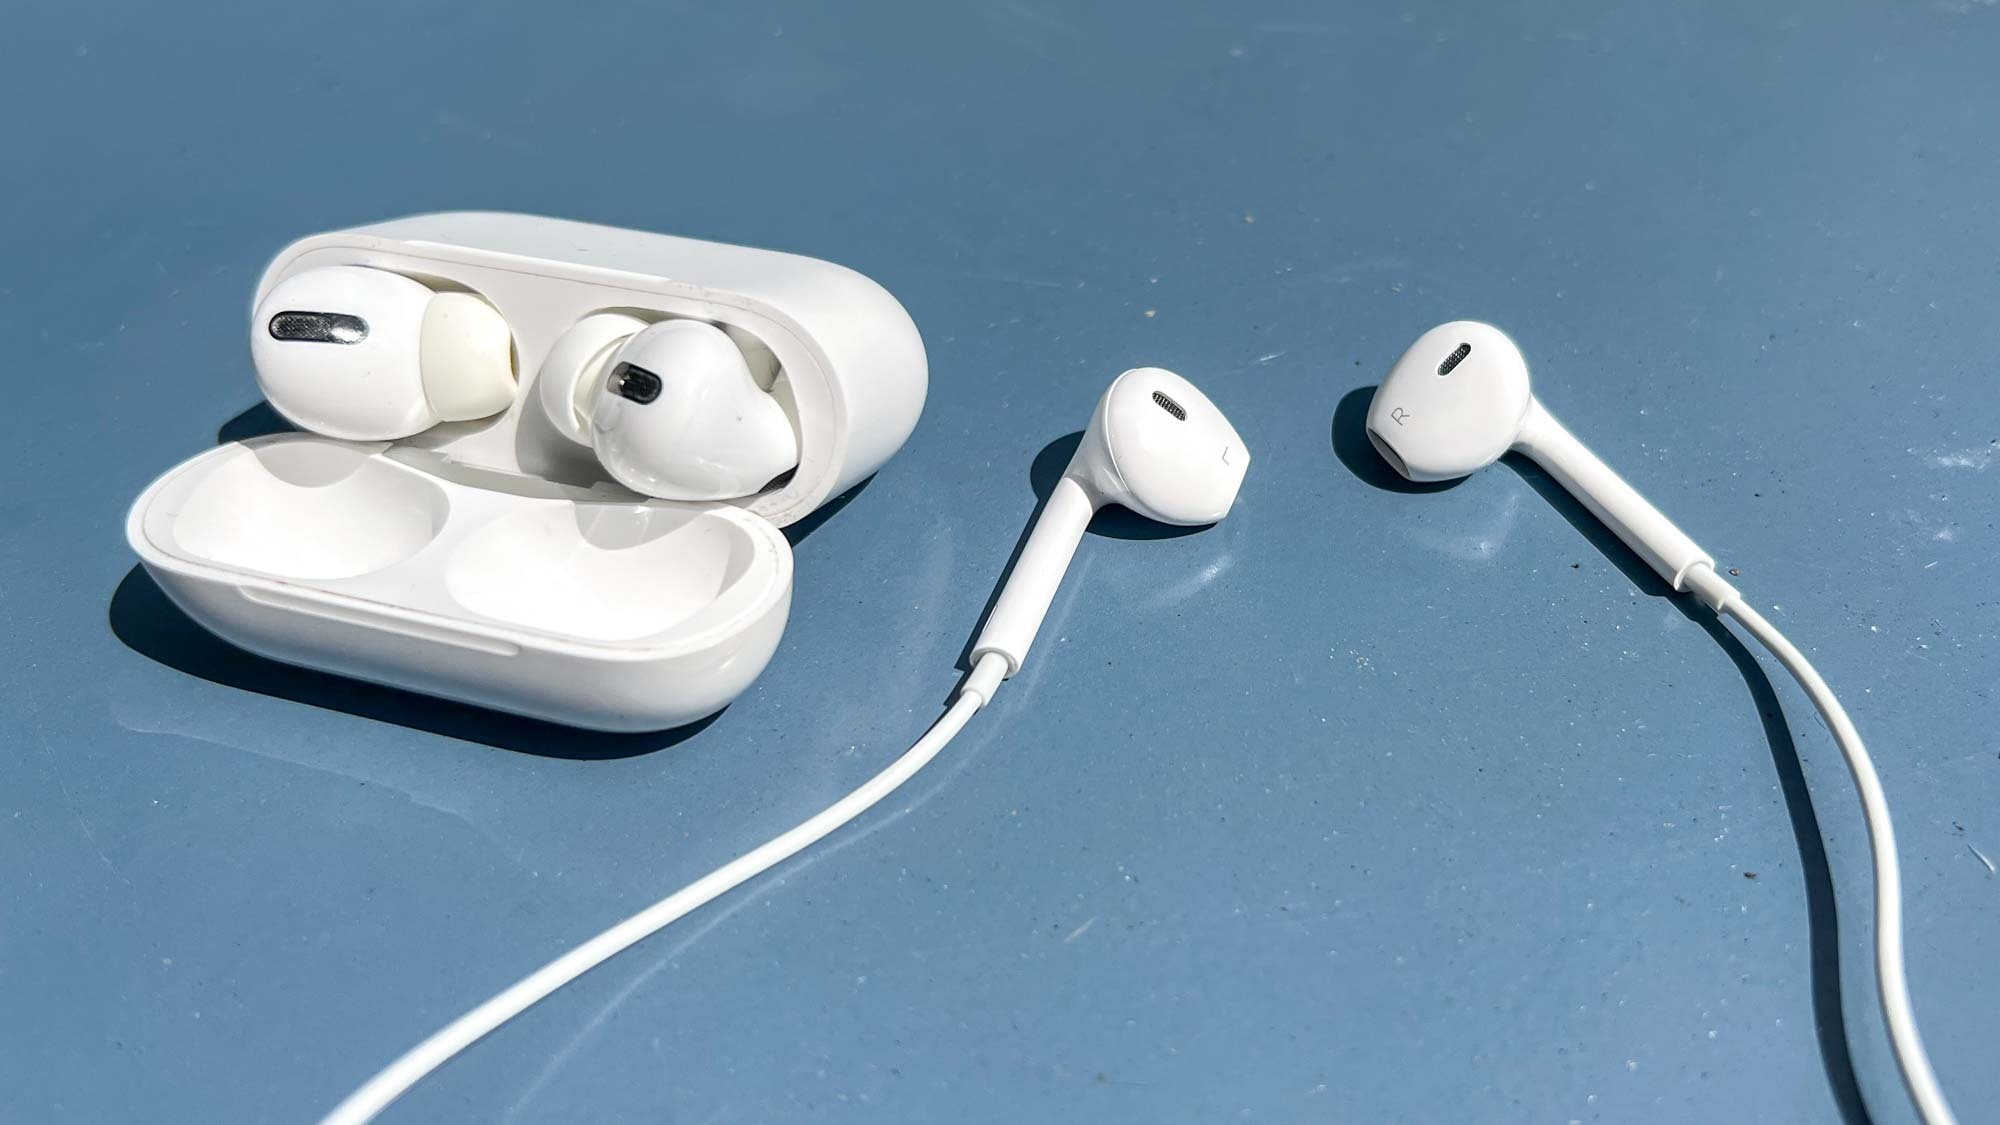 Compare All Earbuds & Headphones